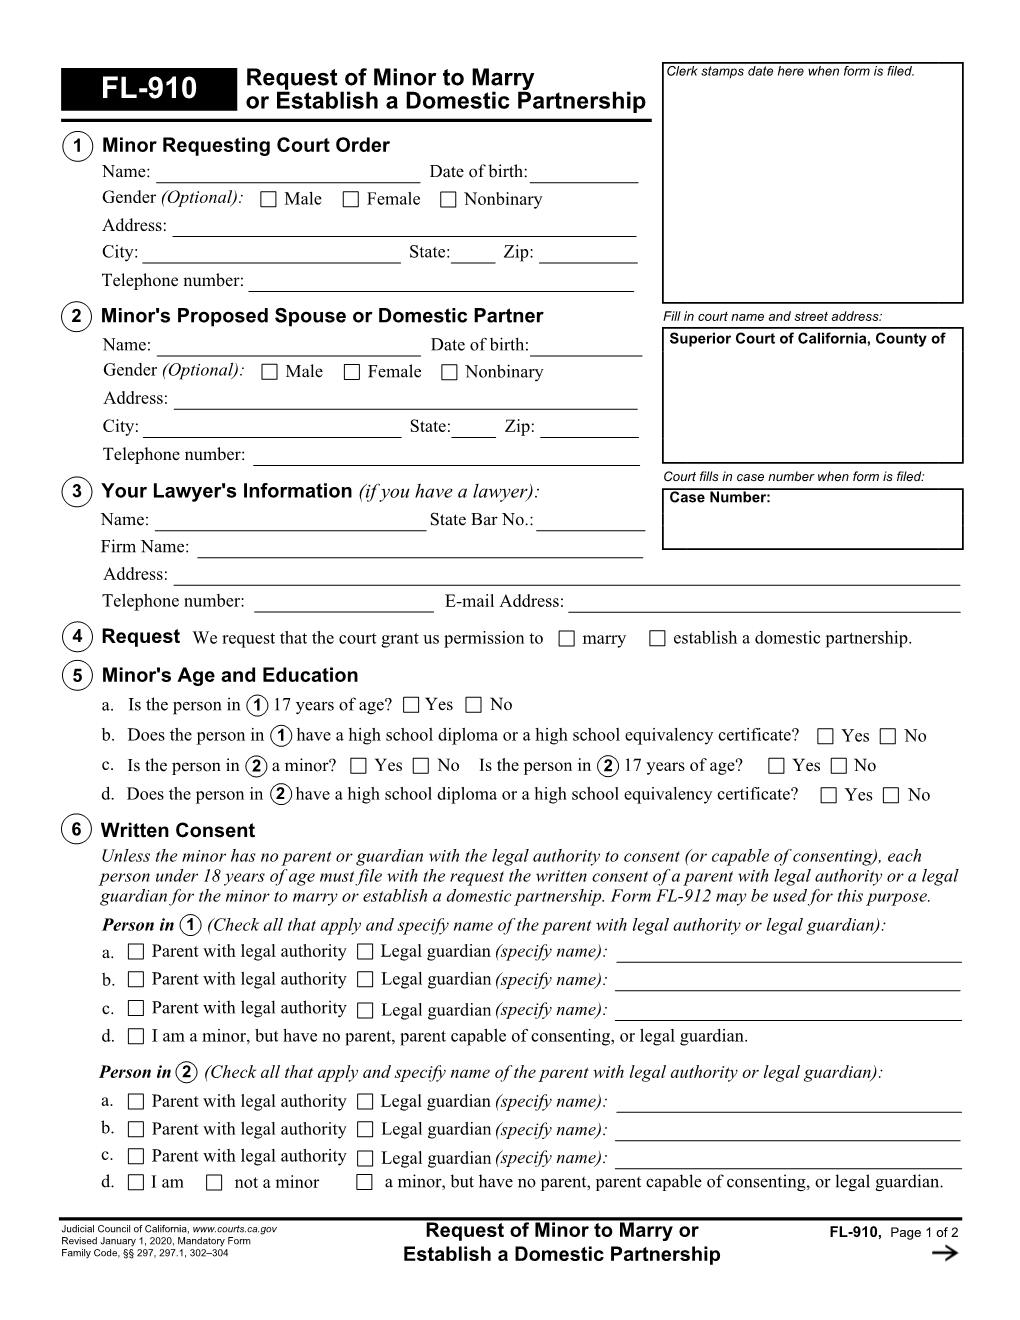 FL-910 Request of Minor to Marry Or Establish a Domestic Partnership